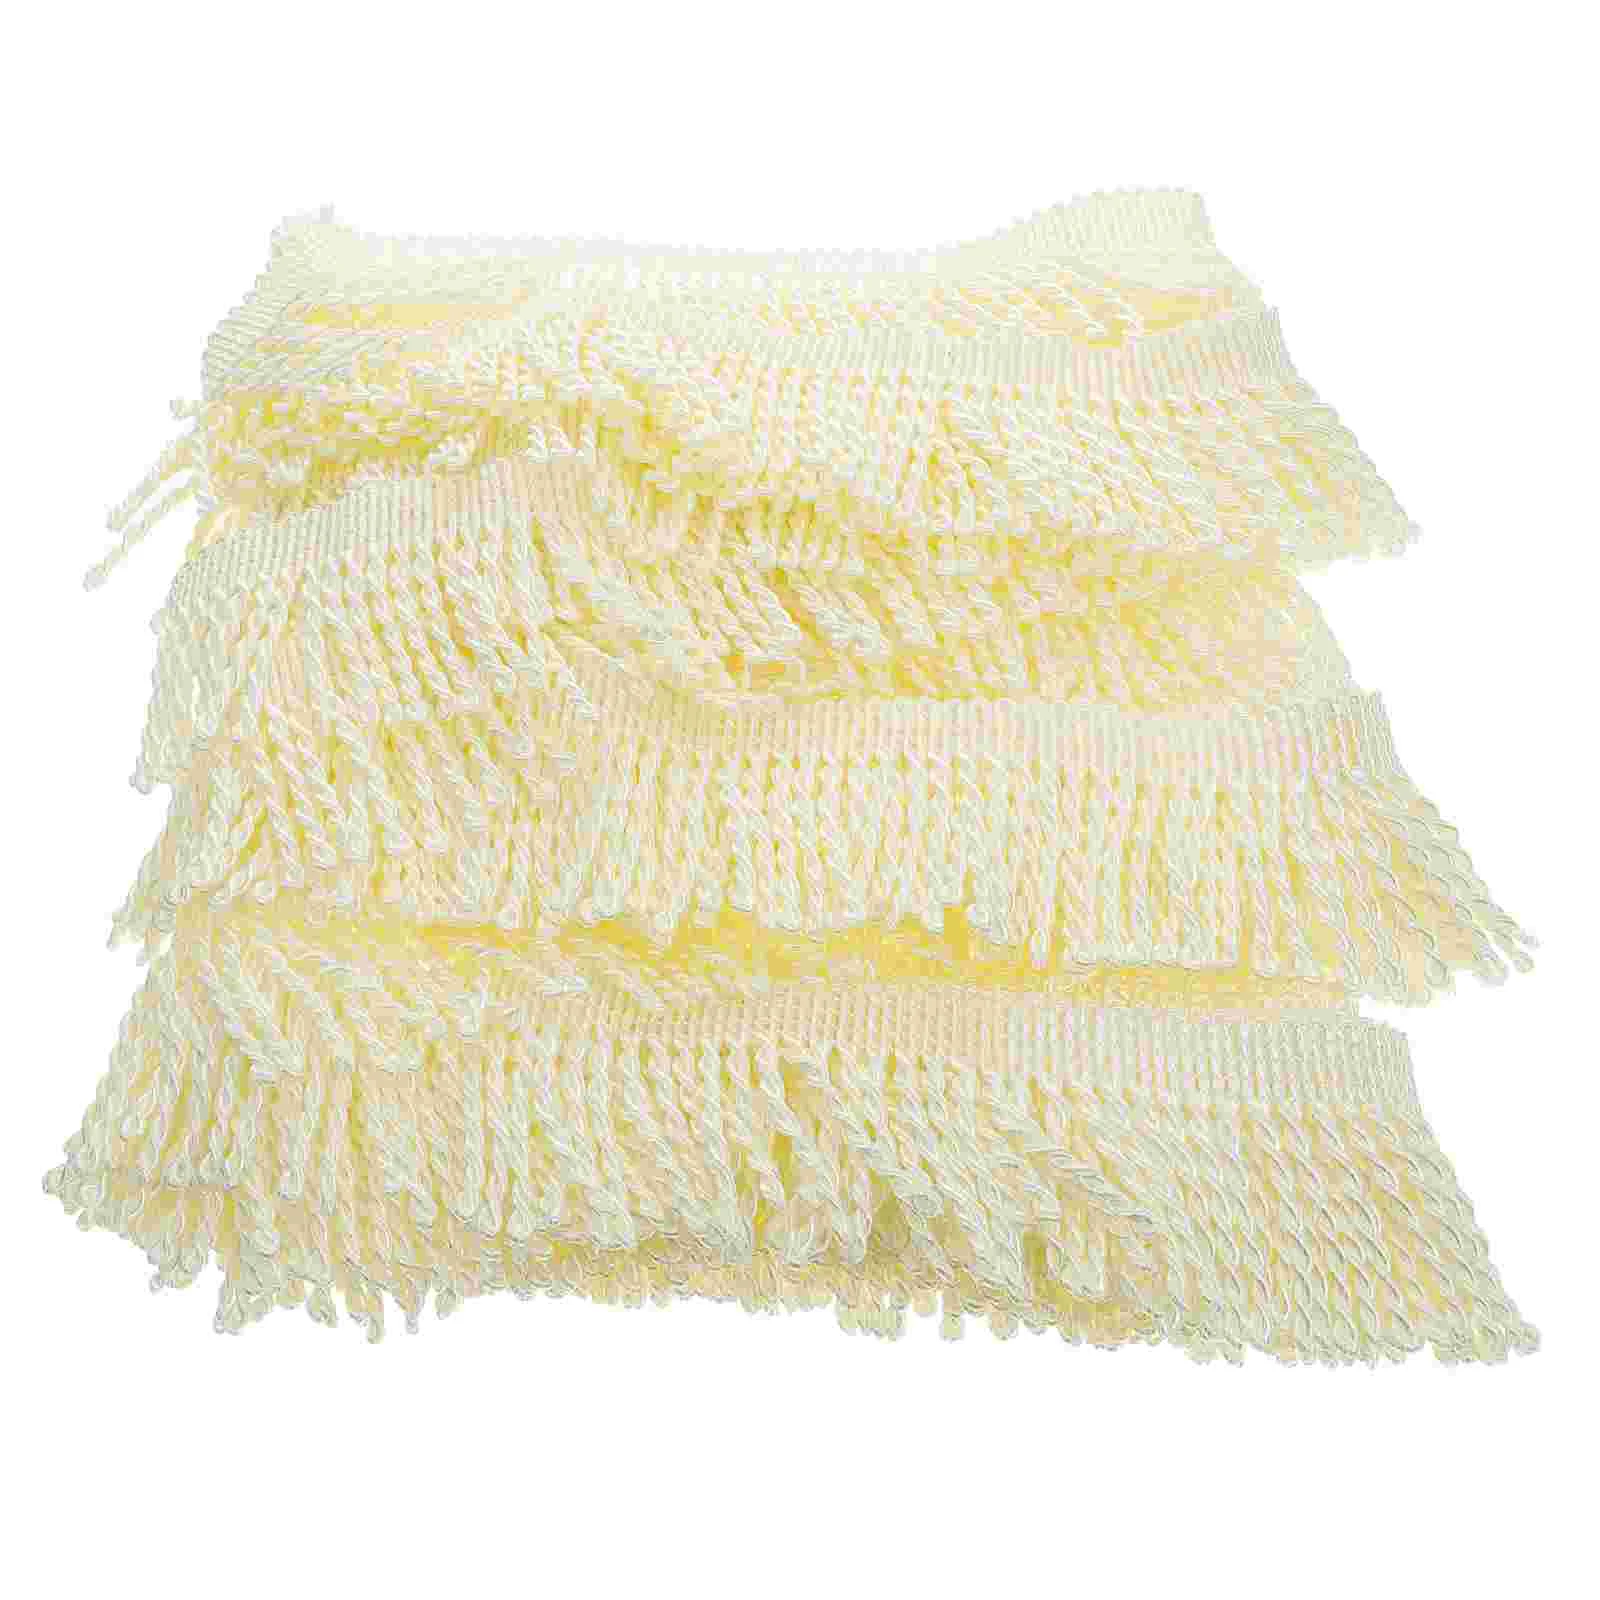 

Trim Sewing Lace Fabric Fringe Diy Tassel Curtain Craft Ribbon Fringes Wide Tassels Curtains Golden Braid Weights Accessory